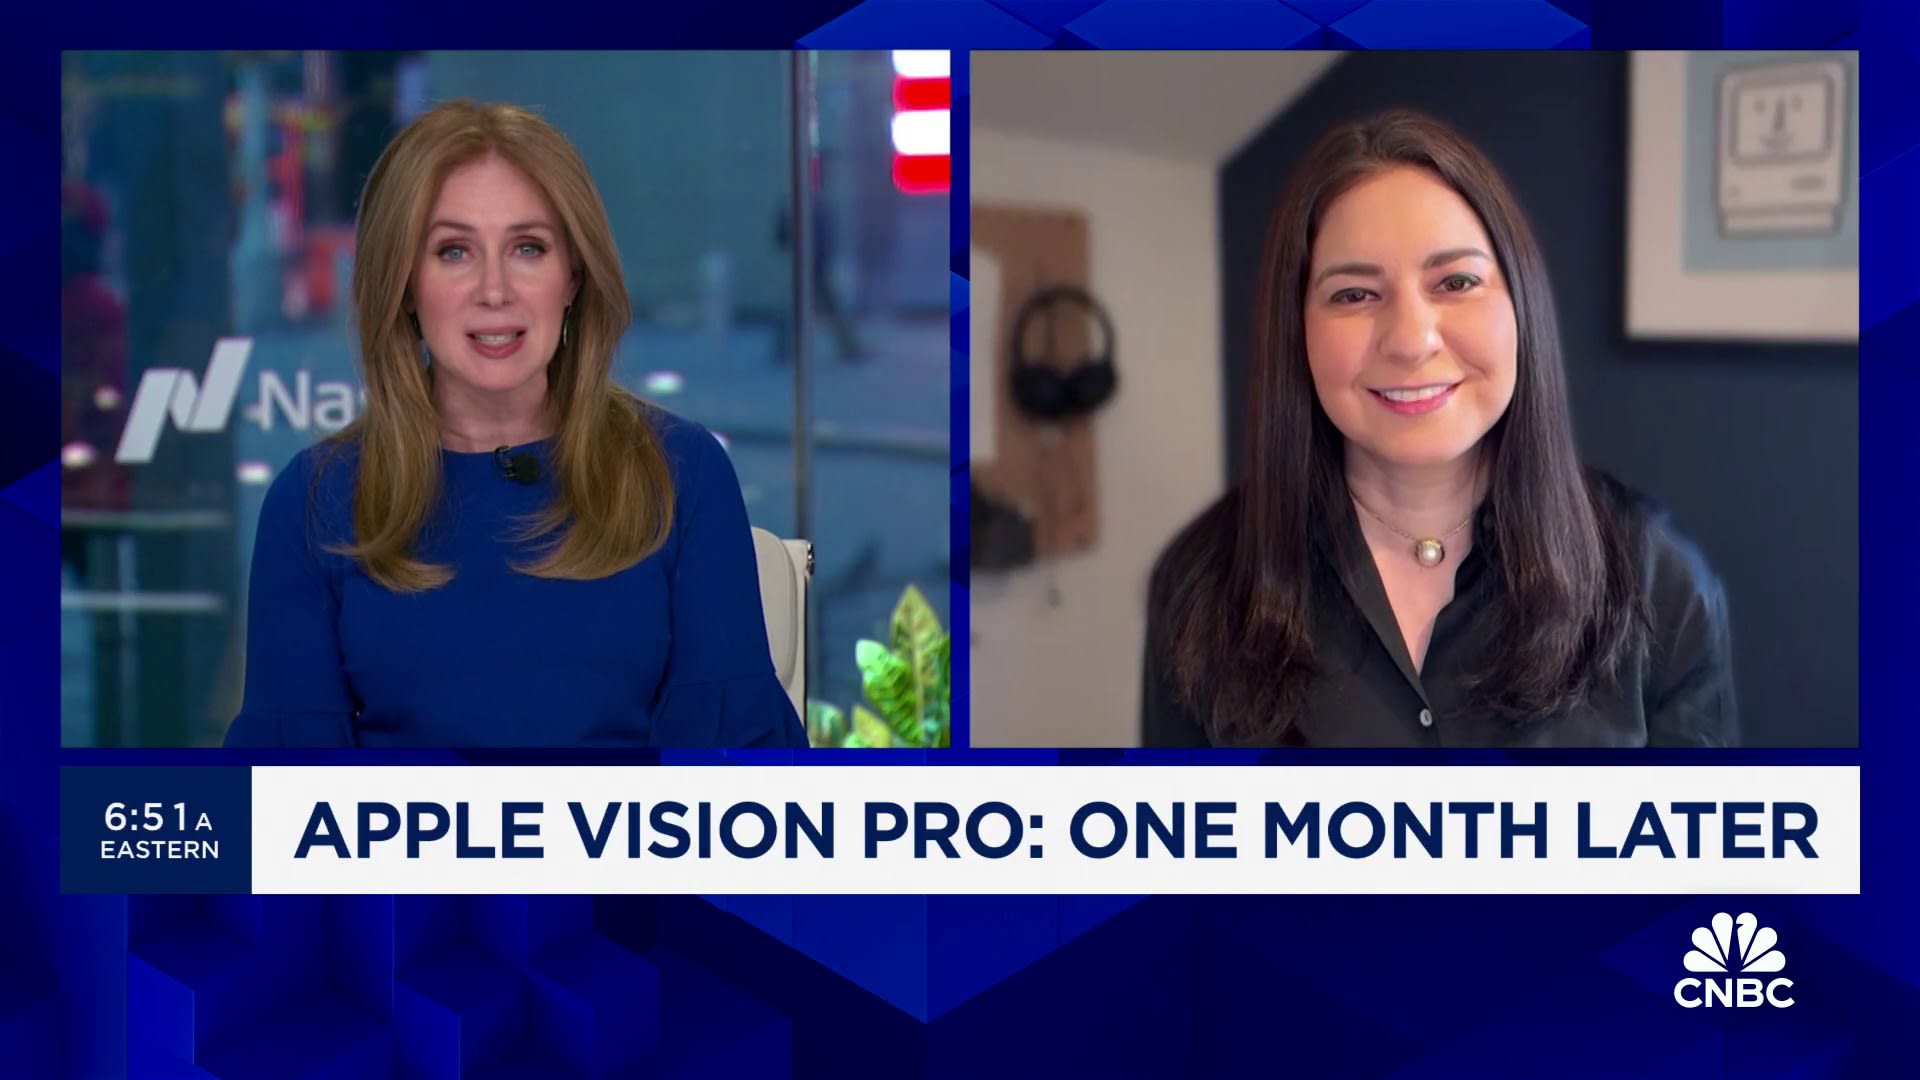 WSJ's Joanna Stern on Apple Vision Pro one month later: I'm reaching for it far less